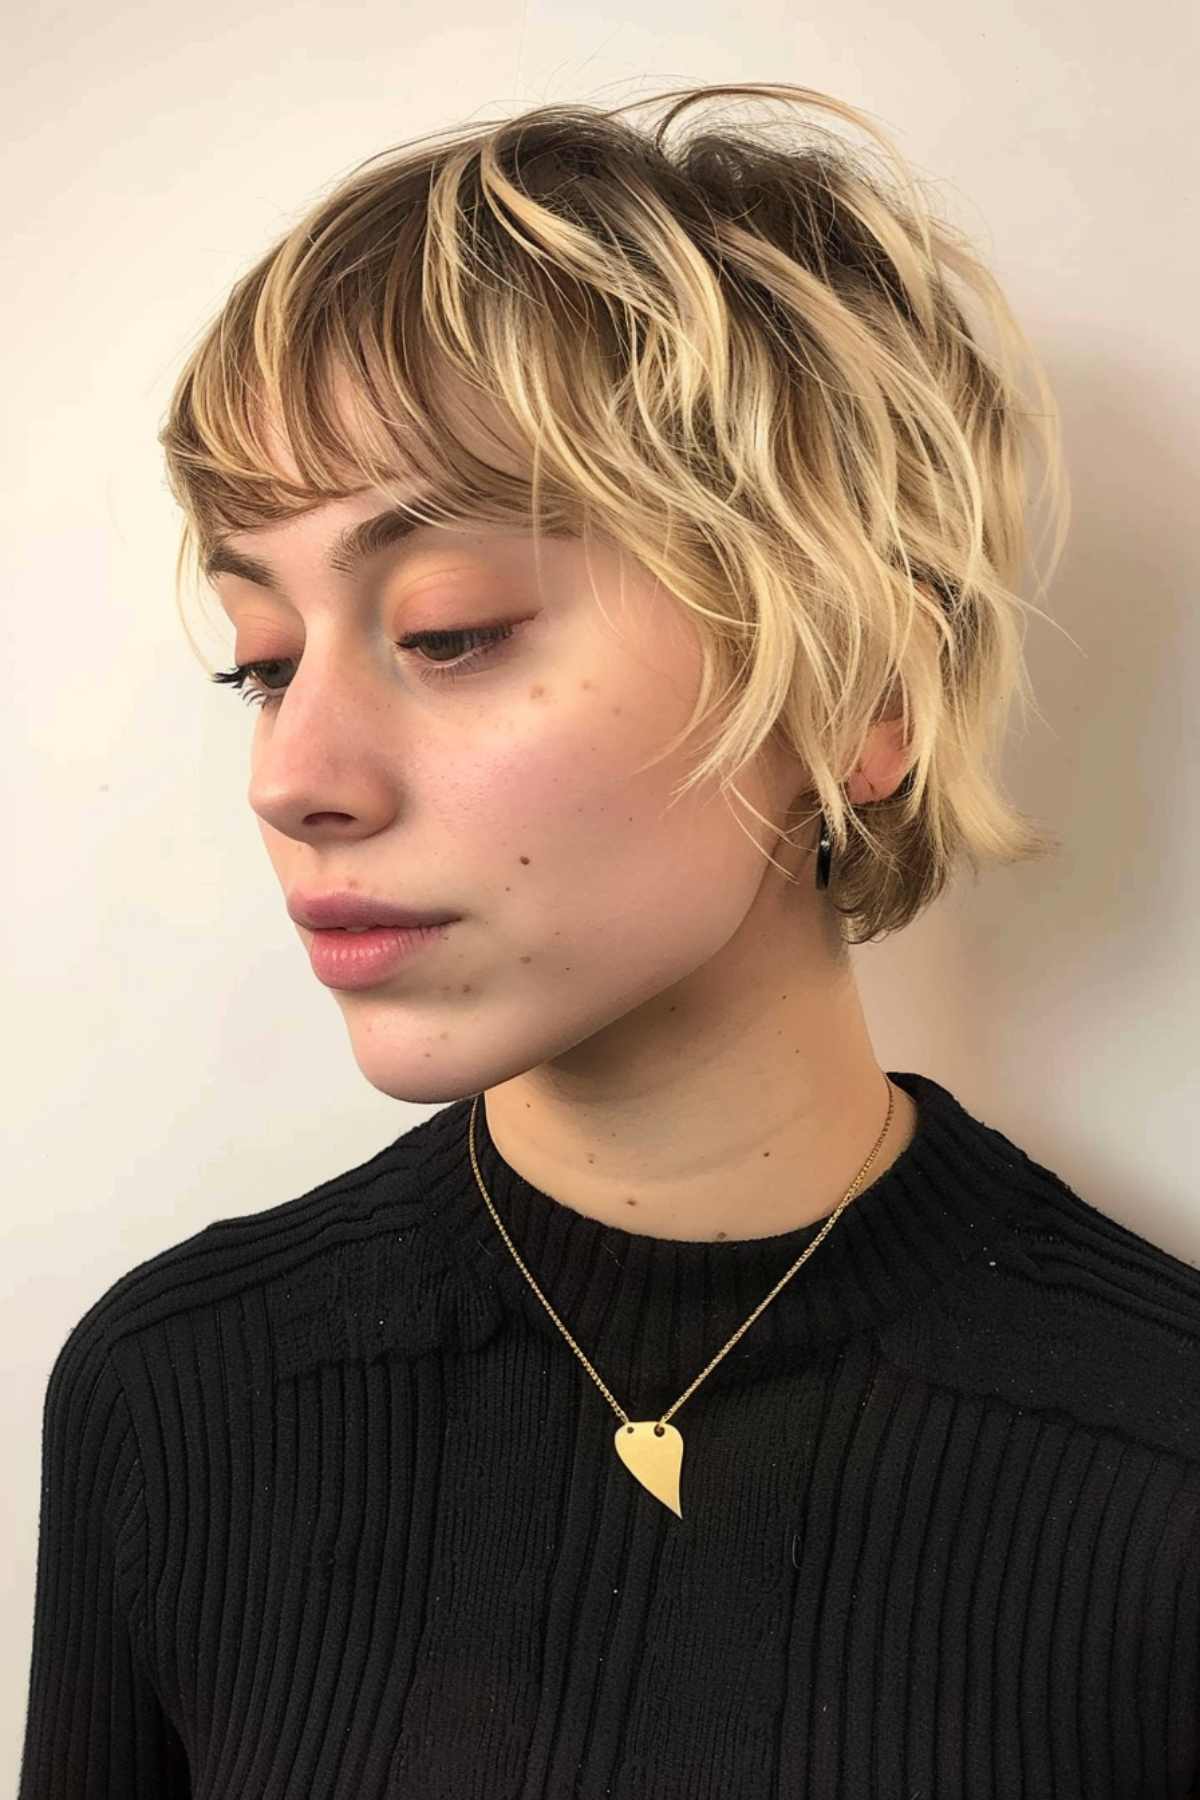 Edgy cut with disconnected layers for a bold, modern style.